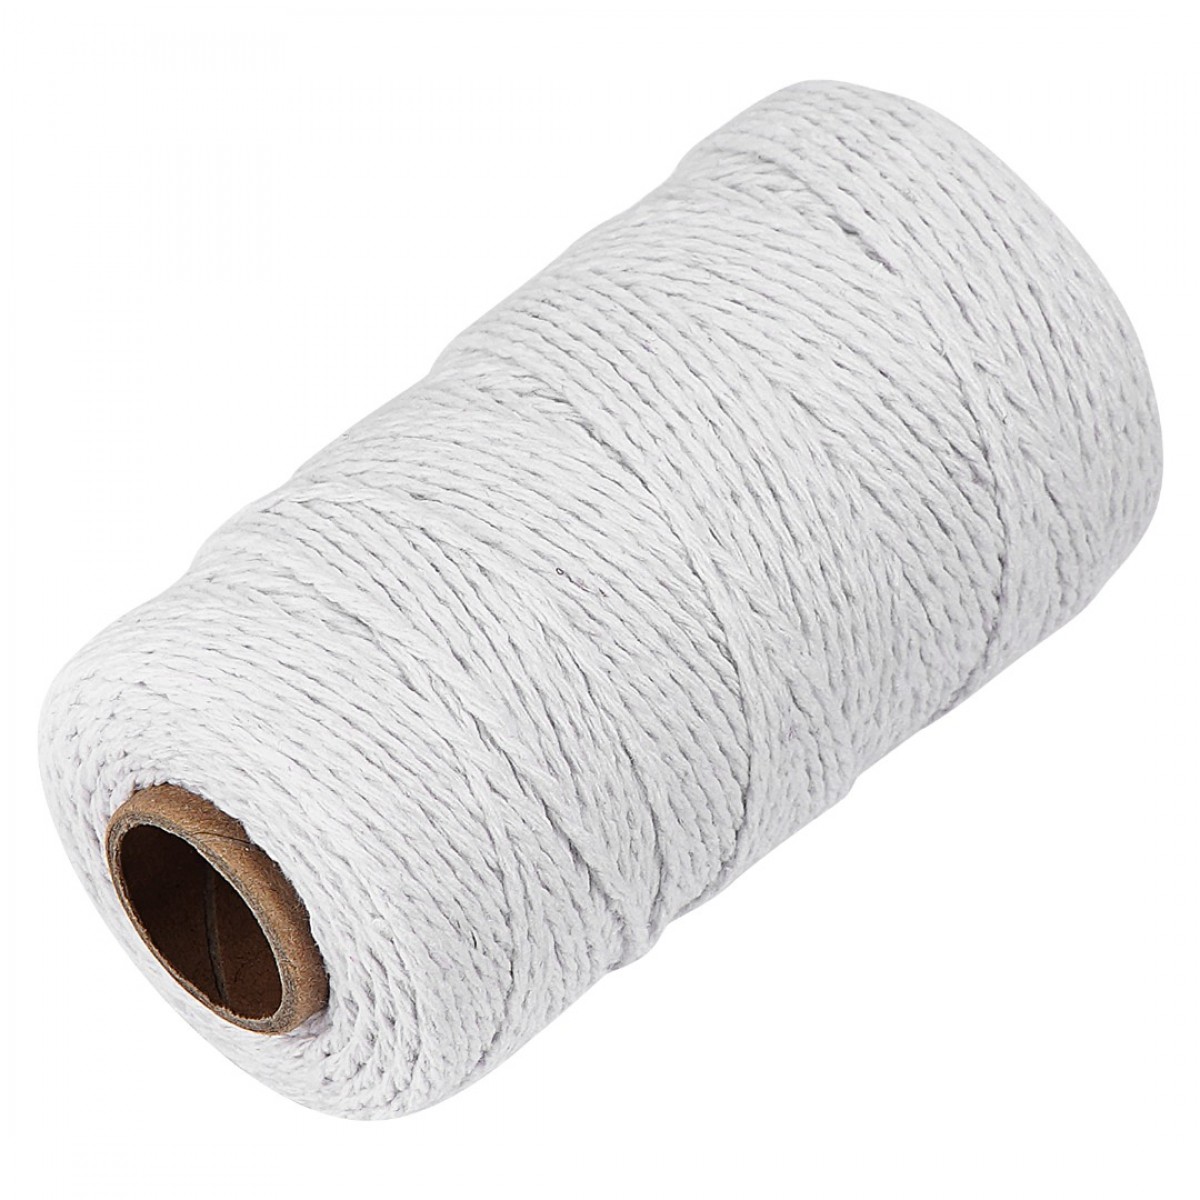 White Cotton Butchers Twine String - Ohtomber 328 Feet 2MM Twine for Crafts, Bakers Twine, Kitchen C